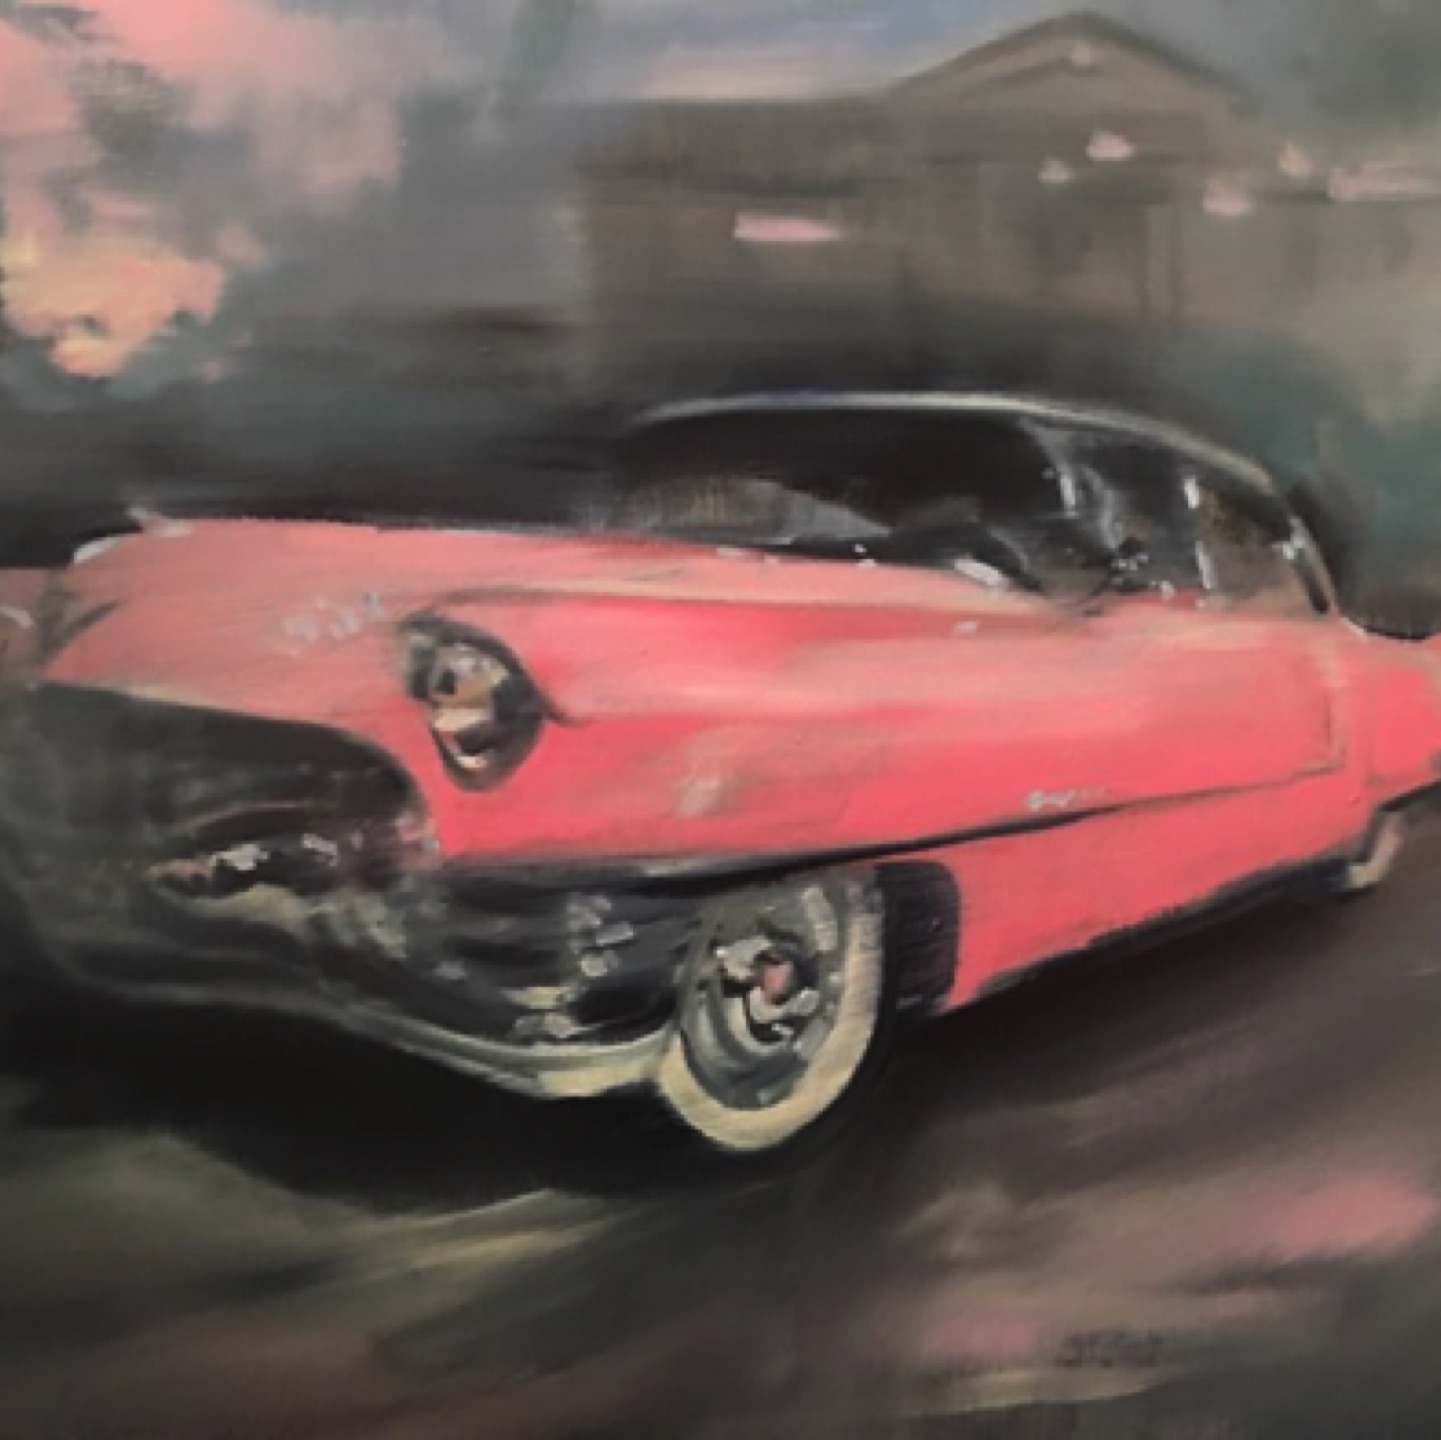 Gregg Chadwick
Pink Cadillac - Elvis at Graceland
24"x30"oil on linen 2017
Dewitt Collection, Vacaville, California